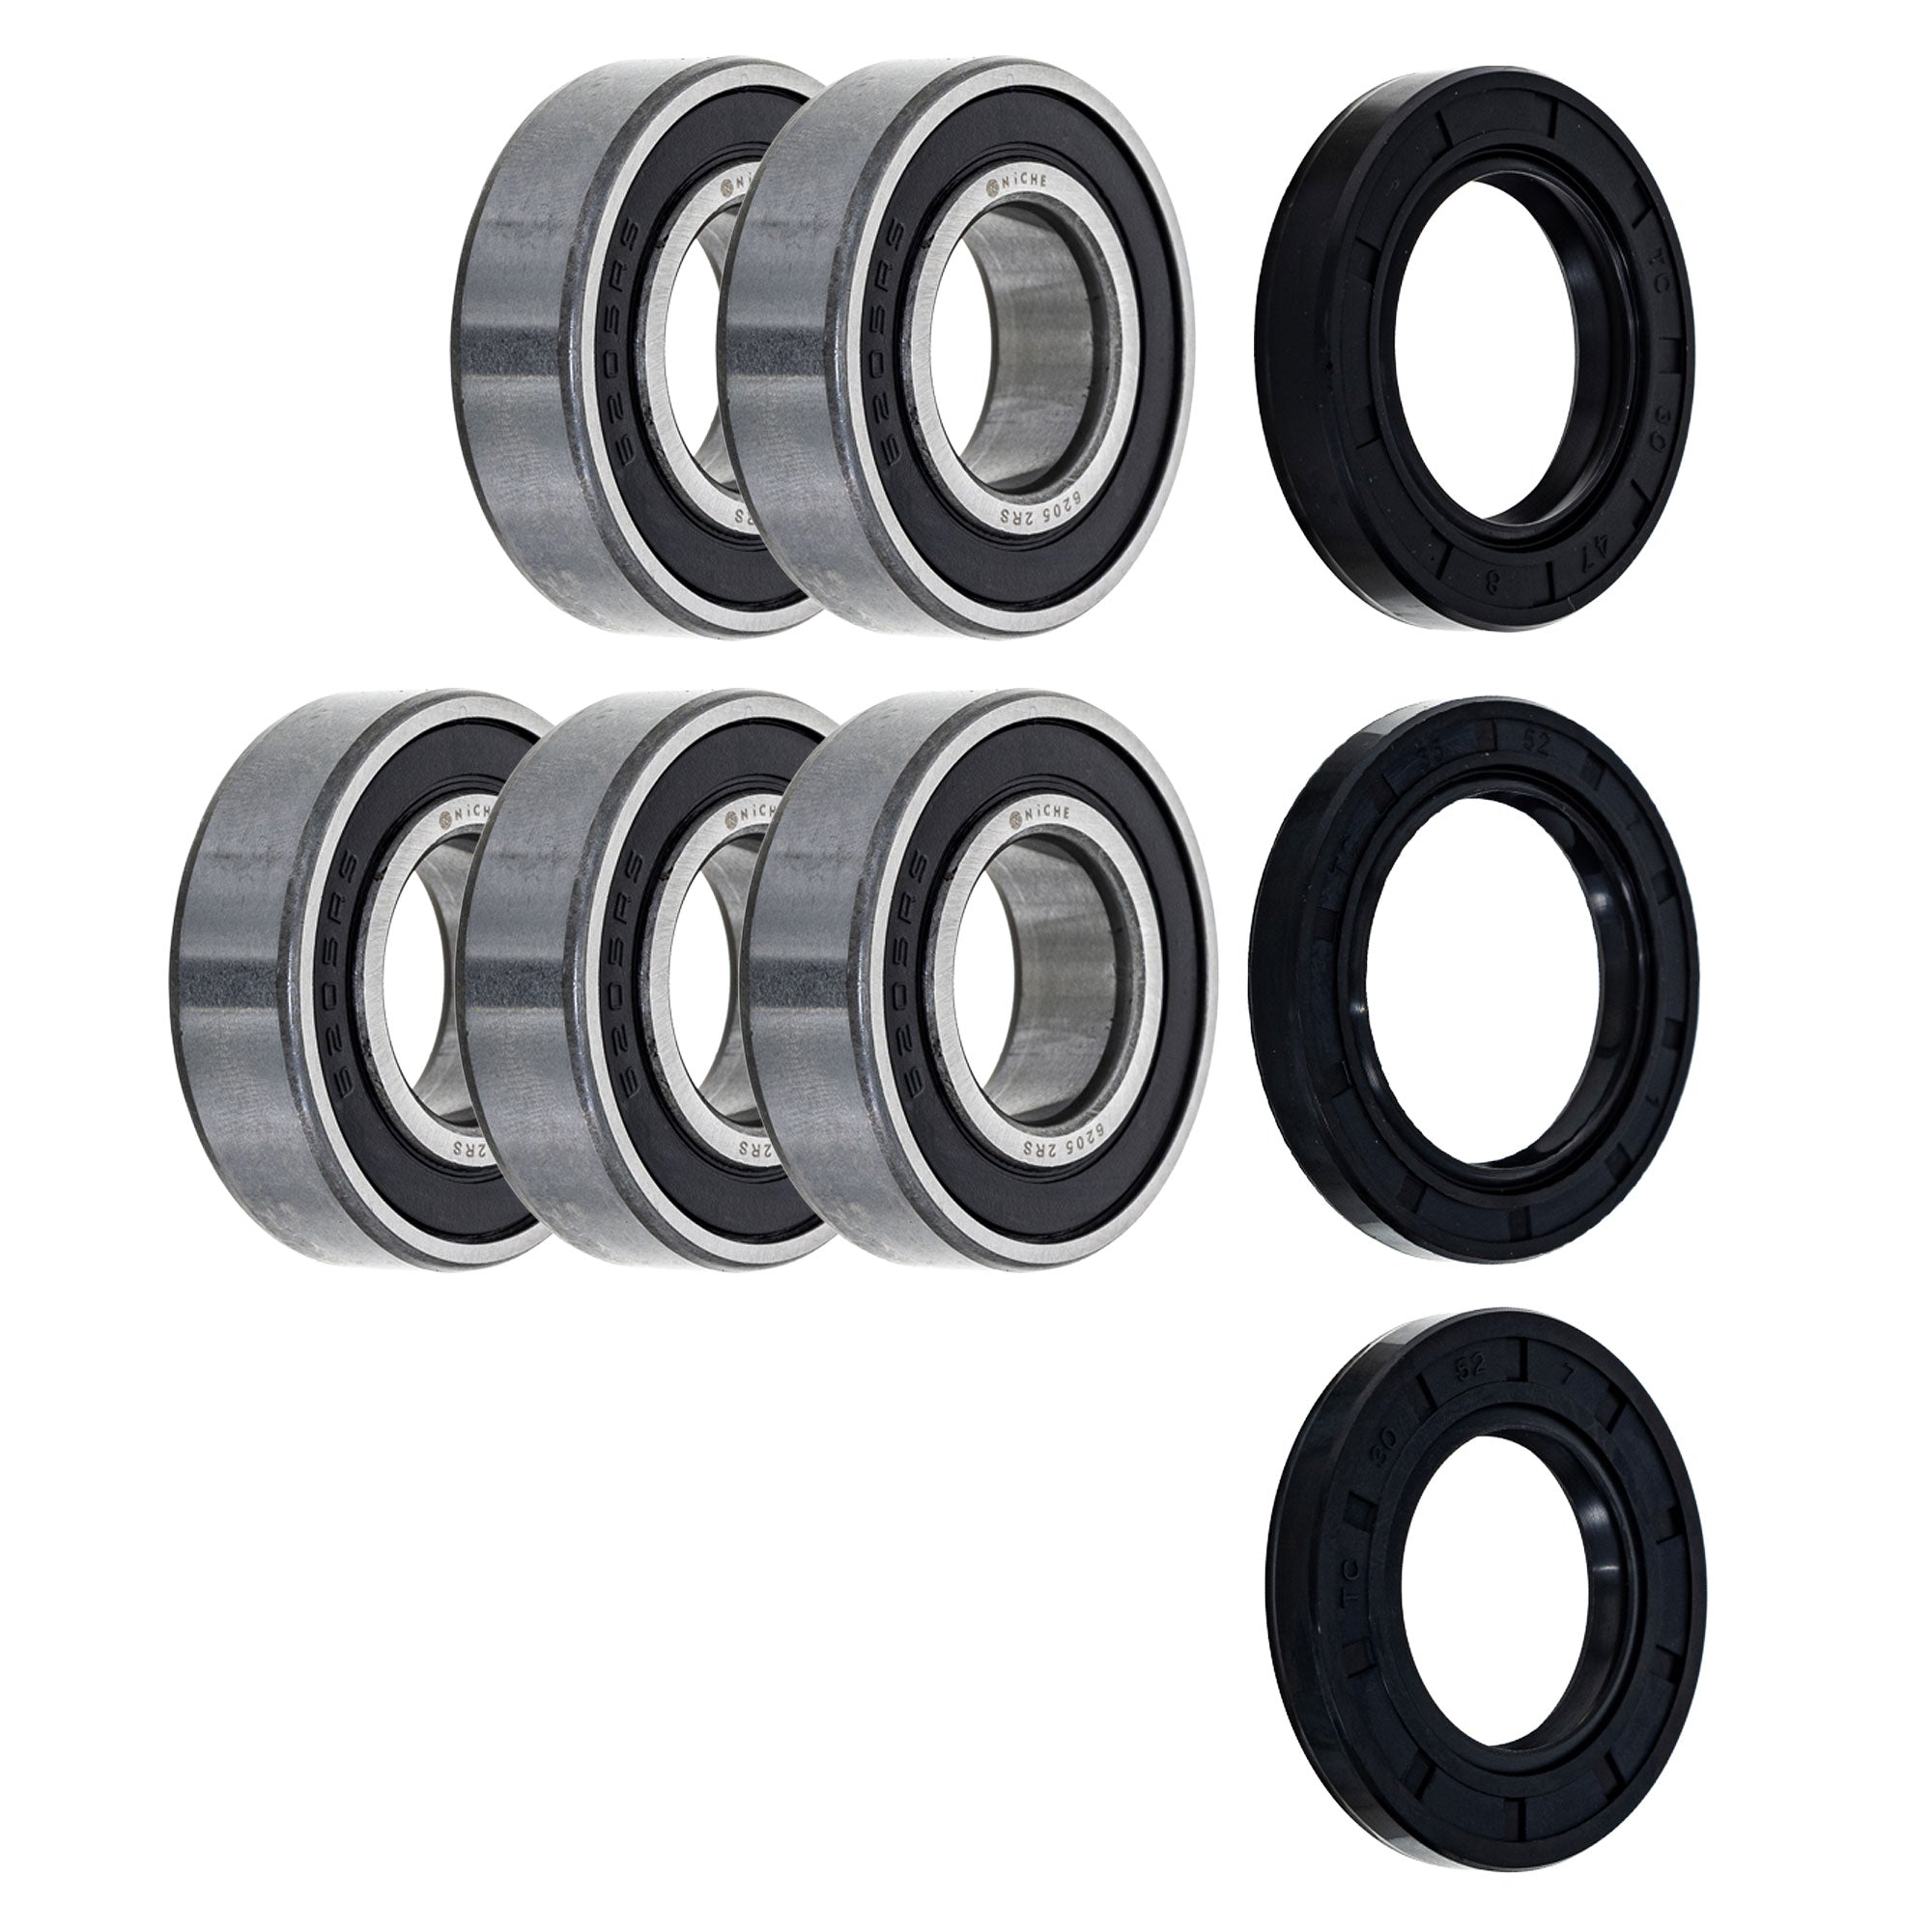 Wheel Bearing Seal Kit for zOTHER Ref No F800R NICHE MK1008464